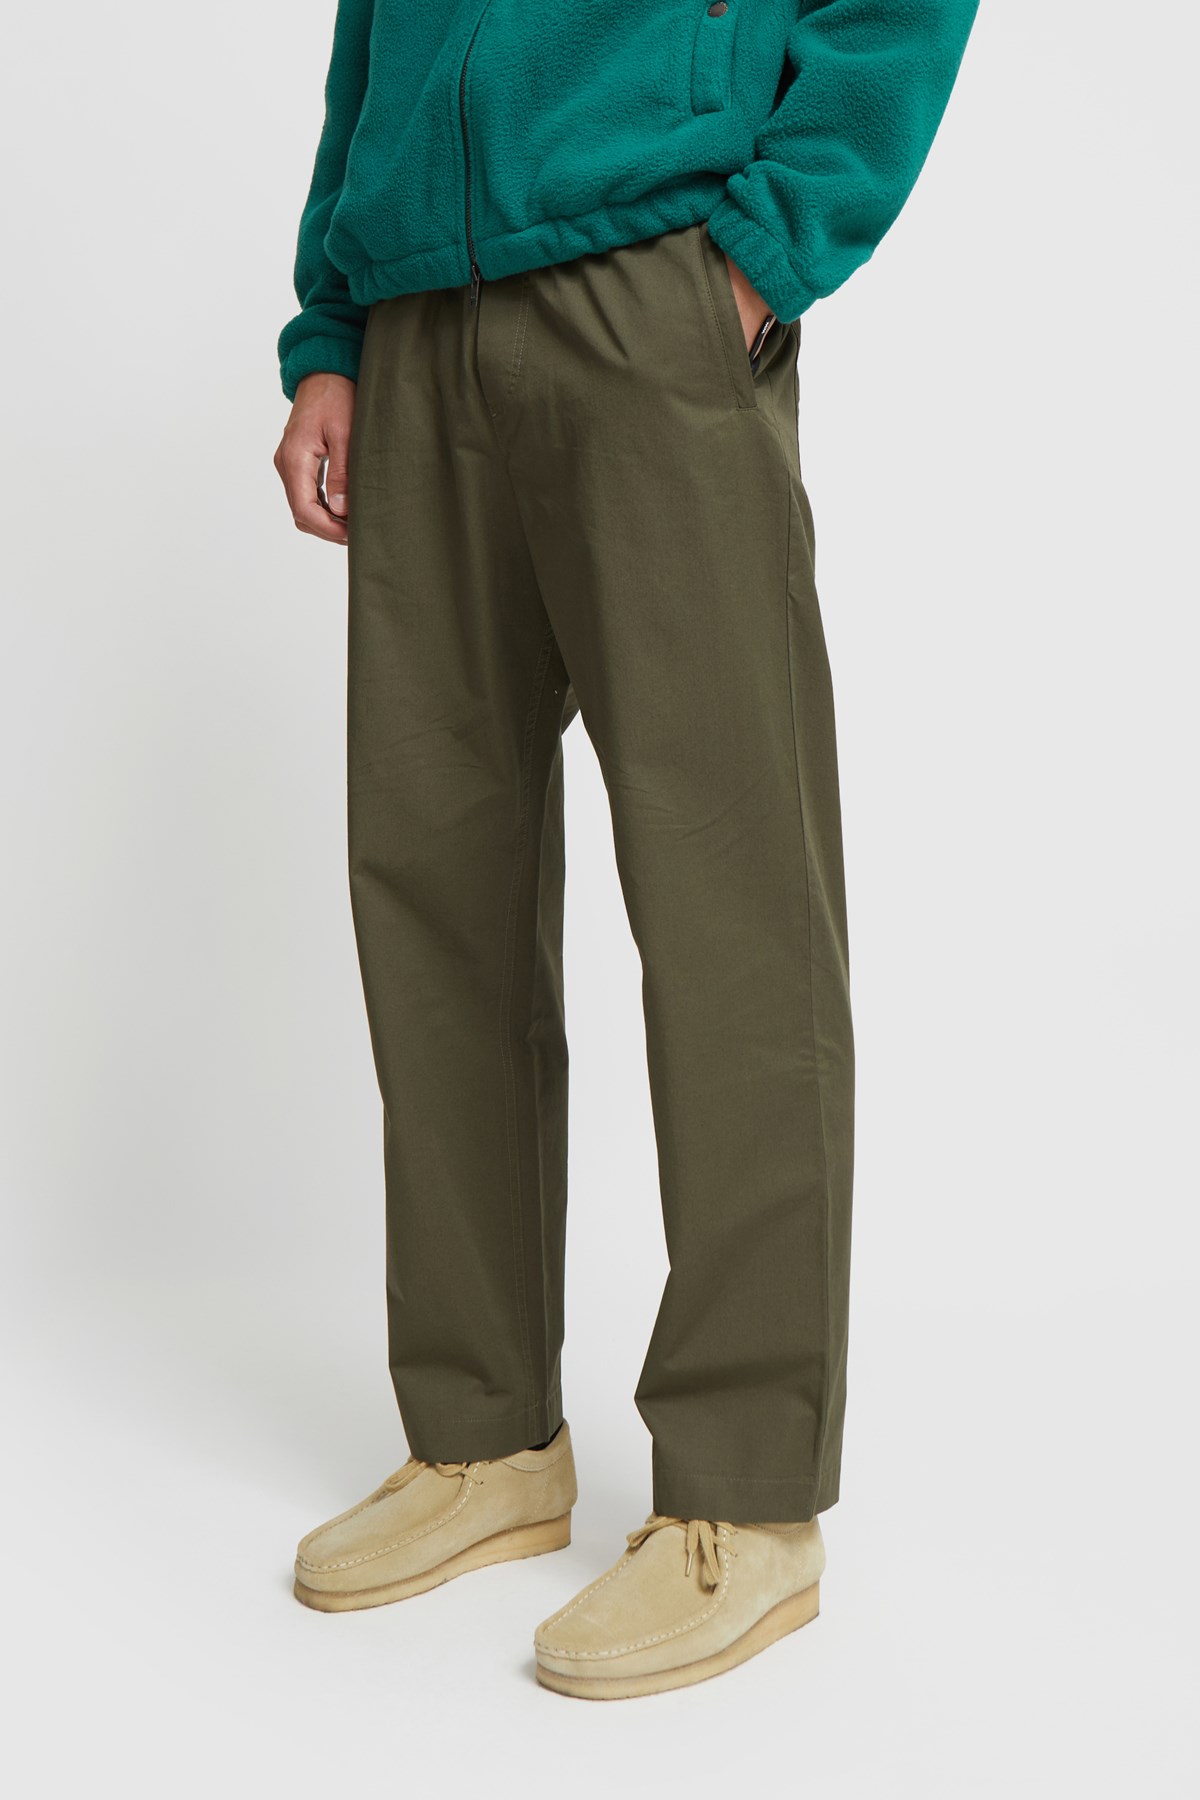 WOOD WOOD Temple Trousers